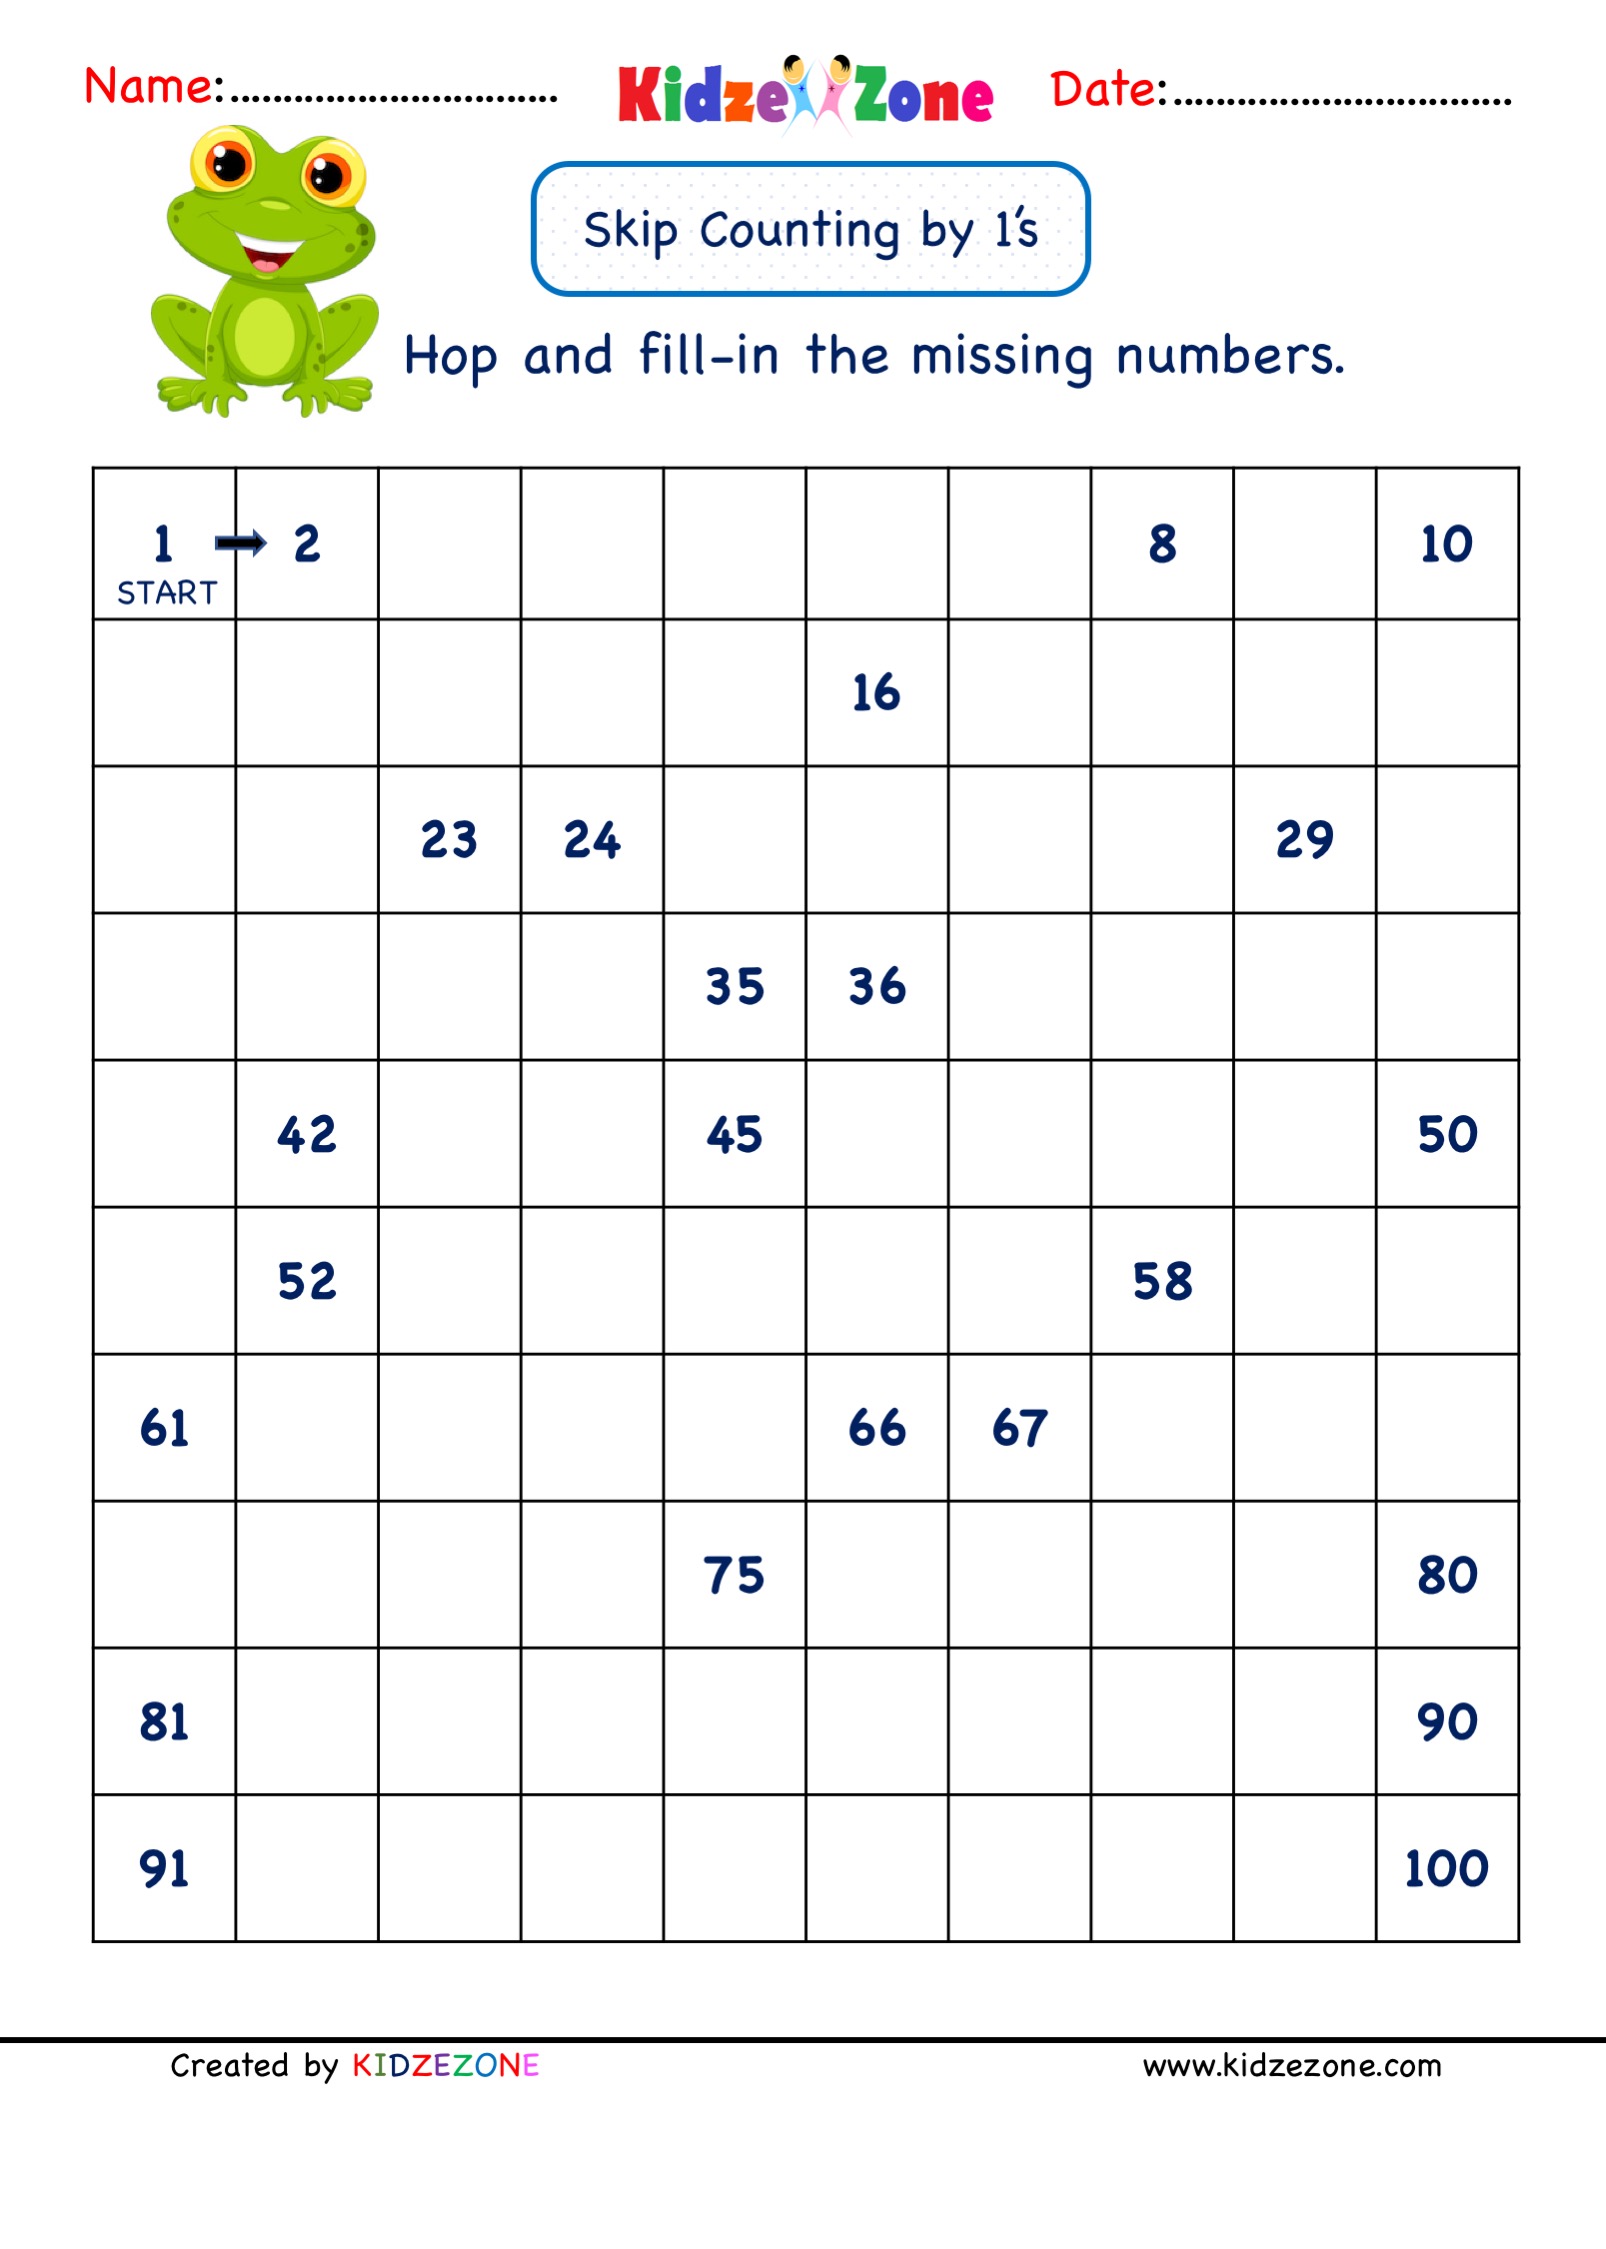 4-free-math-worksheets-second-grade-2-addition-adding-whole-tens-3-digits-missing-number-amp